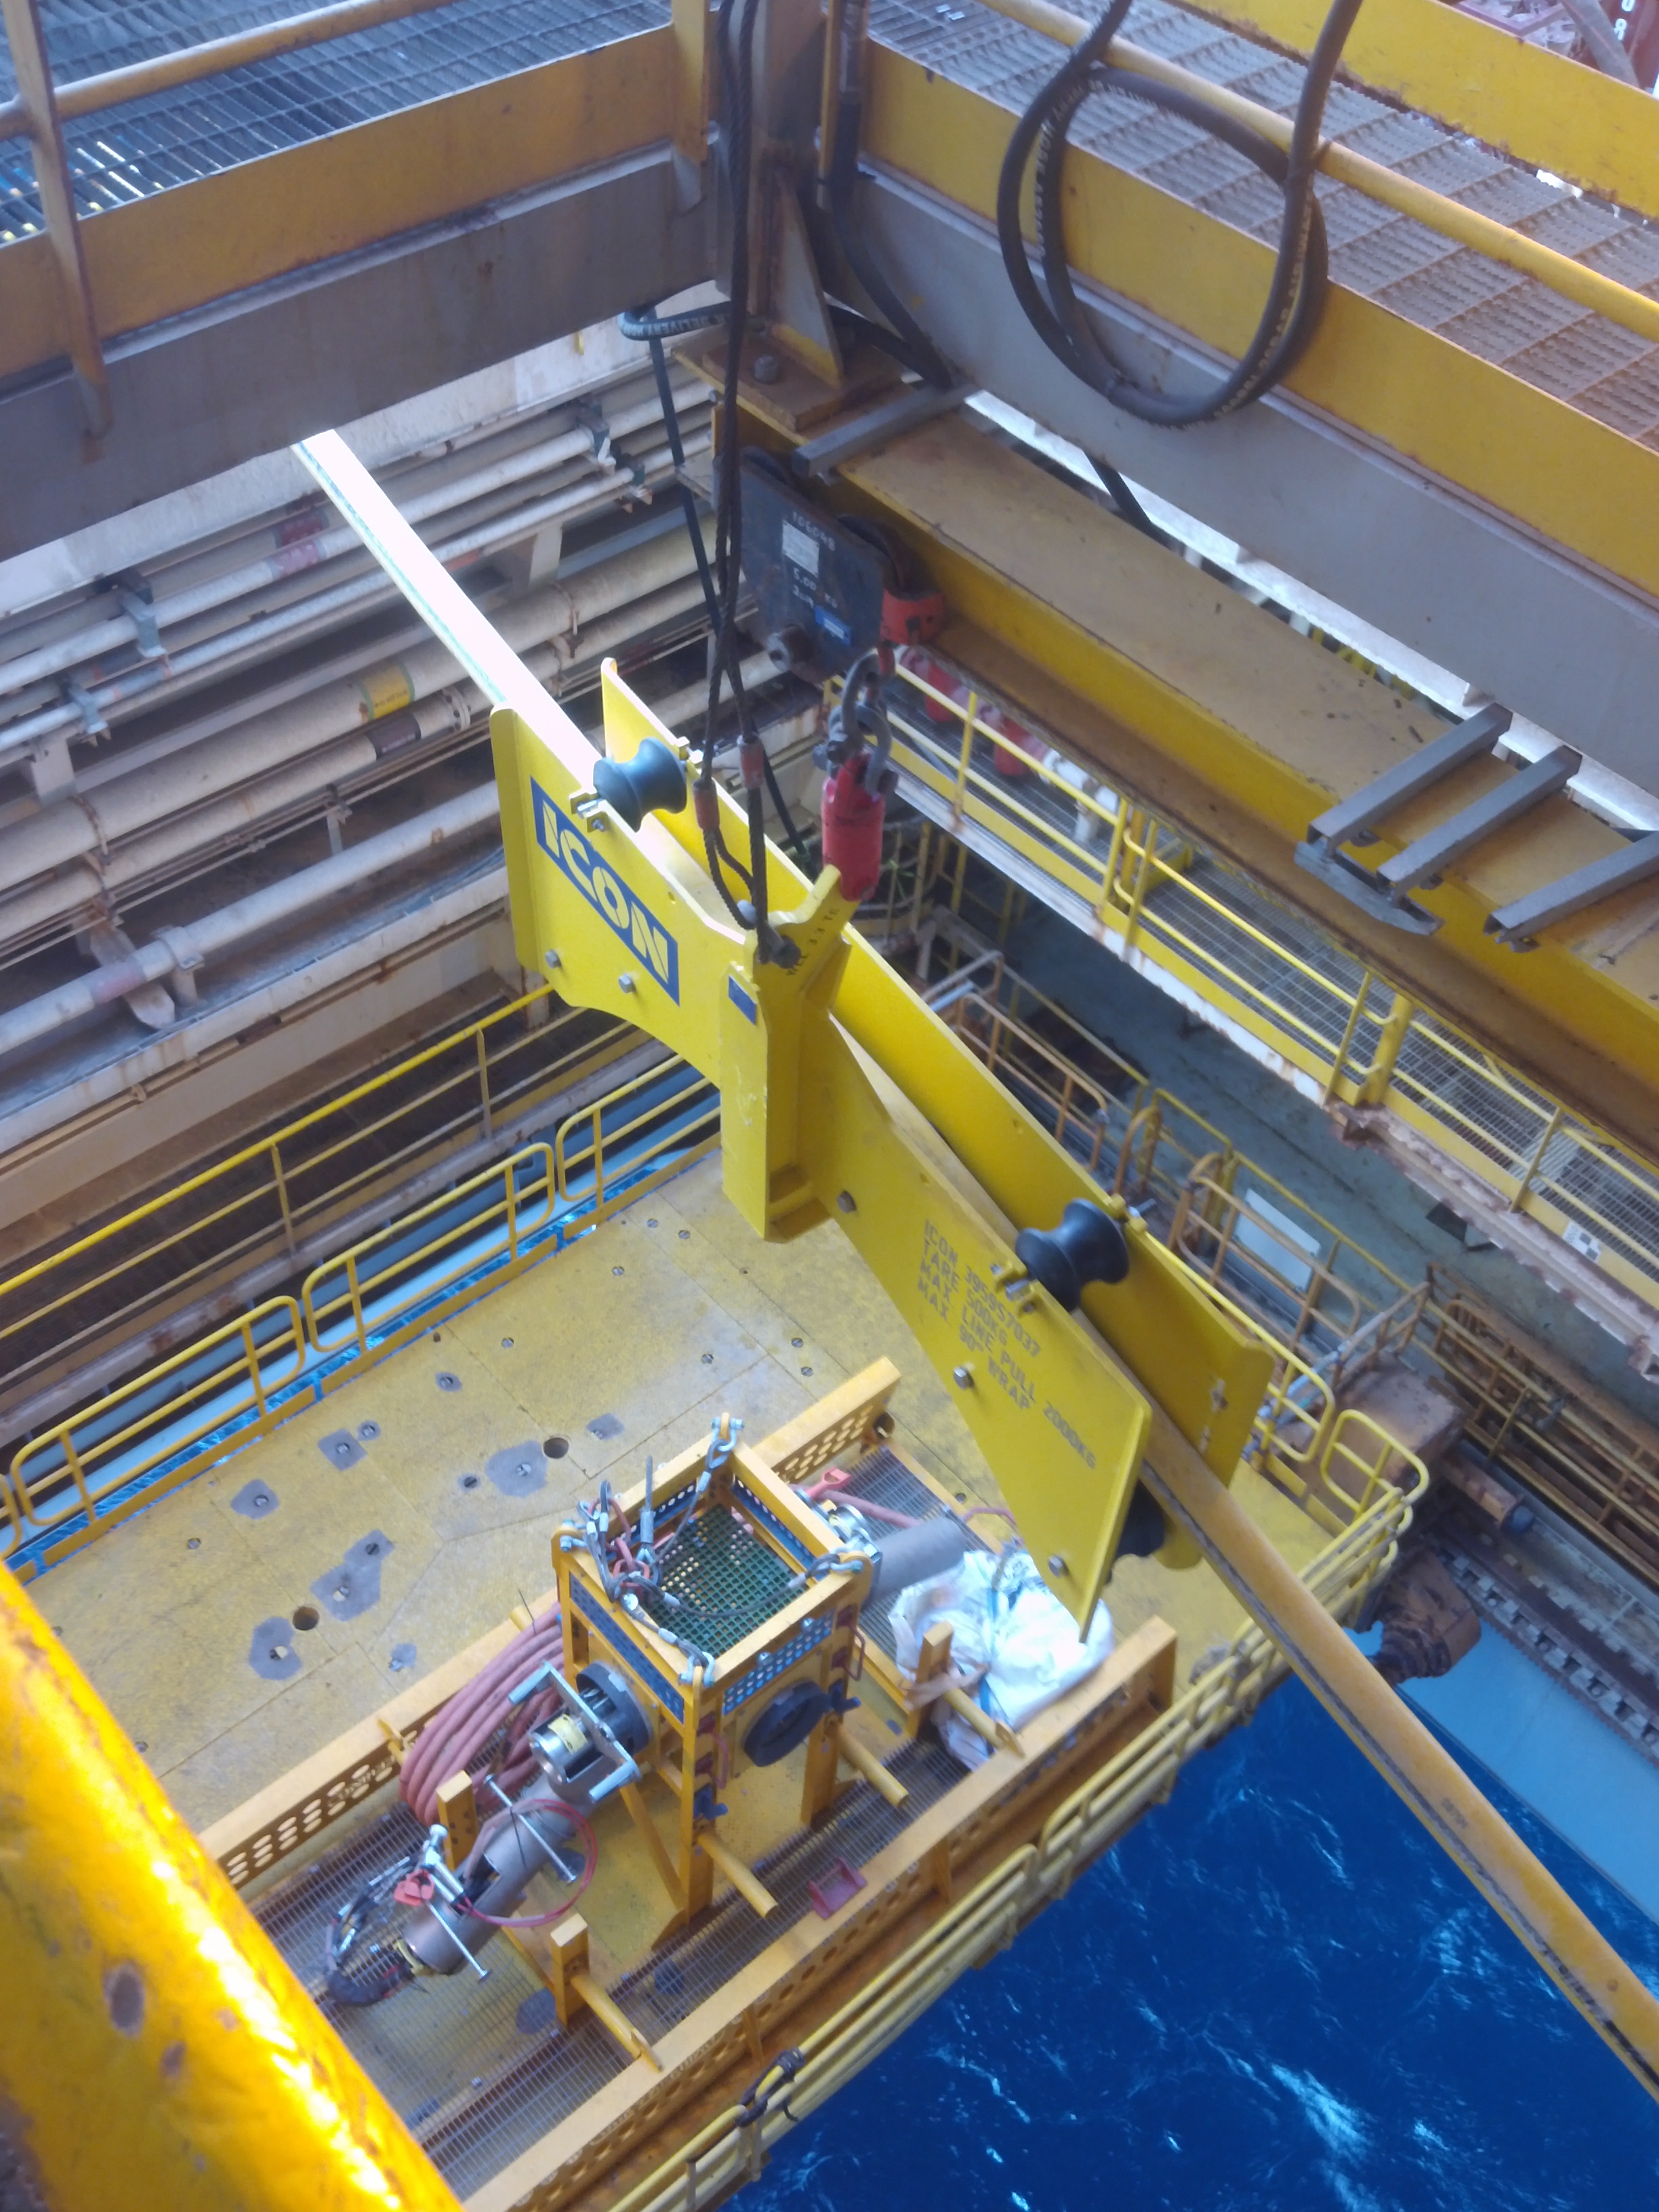 An ICON-built Intermediate Umbilical Sheave in the moonpool of the DPS1 drilling rig for a Subsea Jumper Deployment Frame deployment in the Carnarvon Basin, Western Australia